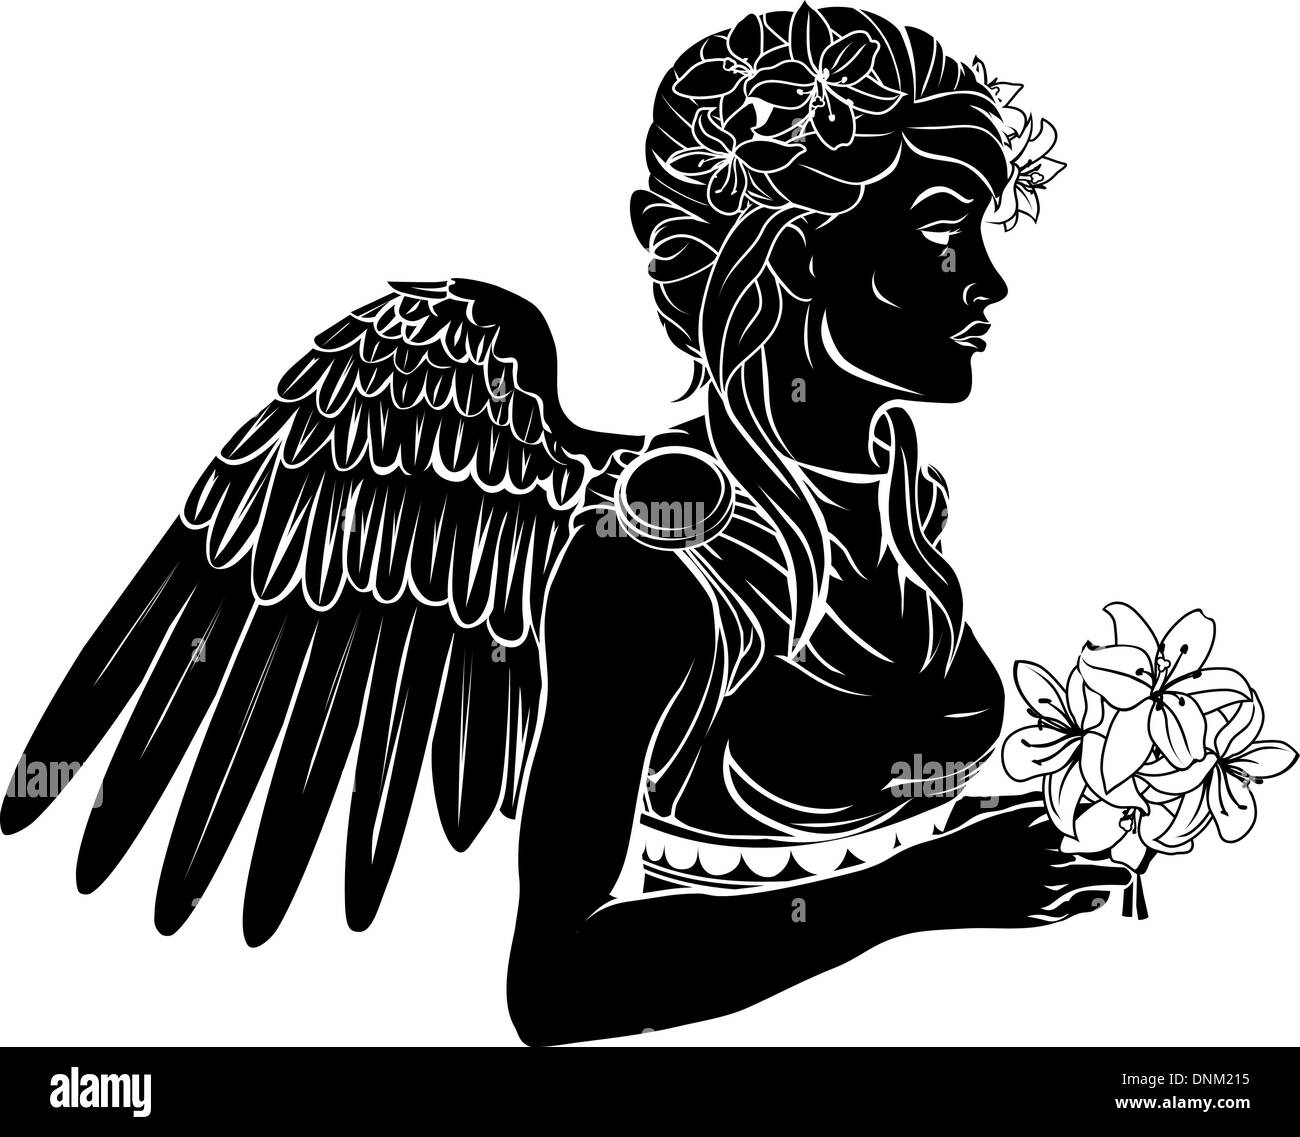 Black And Gray Tattoos And DesignsBlack And Gray Tattoo Ideas And Pictures   Angel tattoo designs Warrior tattoos Guardian angel tattoo designs